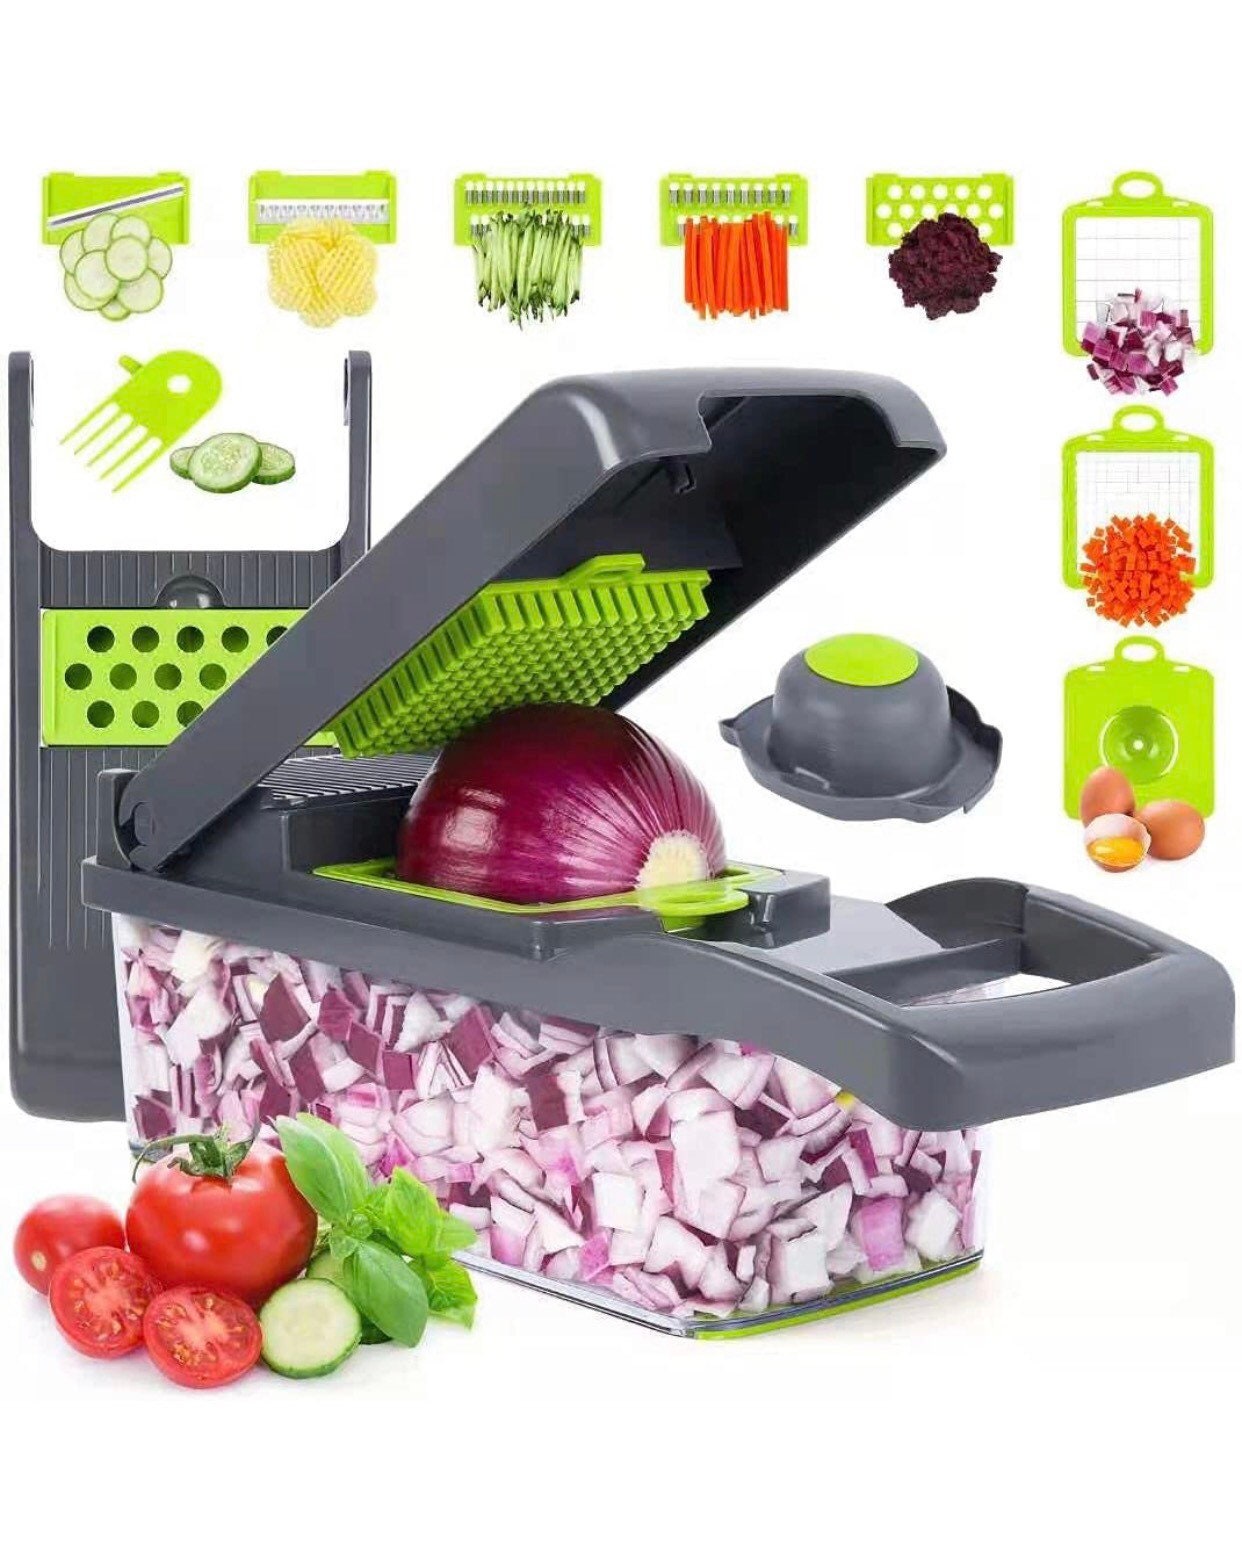 Potato Vegetable Slicer, Fry Cutter for Onion Rings, Chips and French Fries  (Green) - Walmart.com